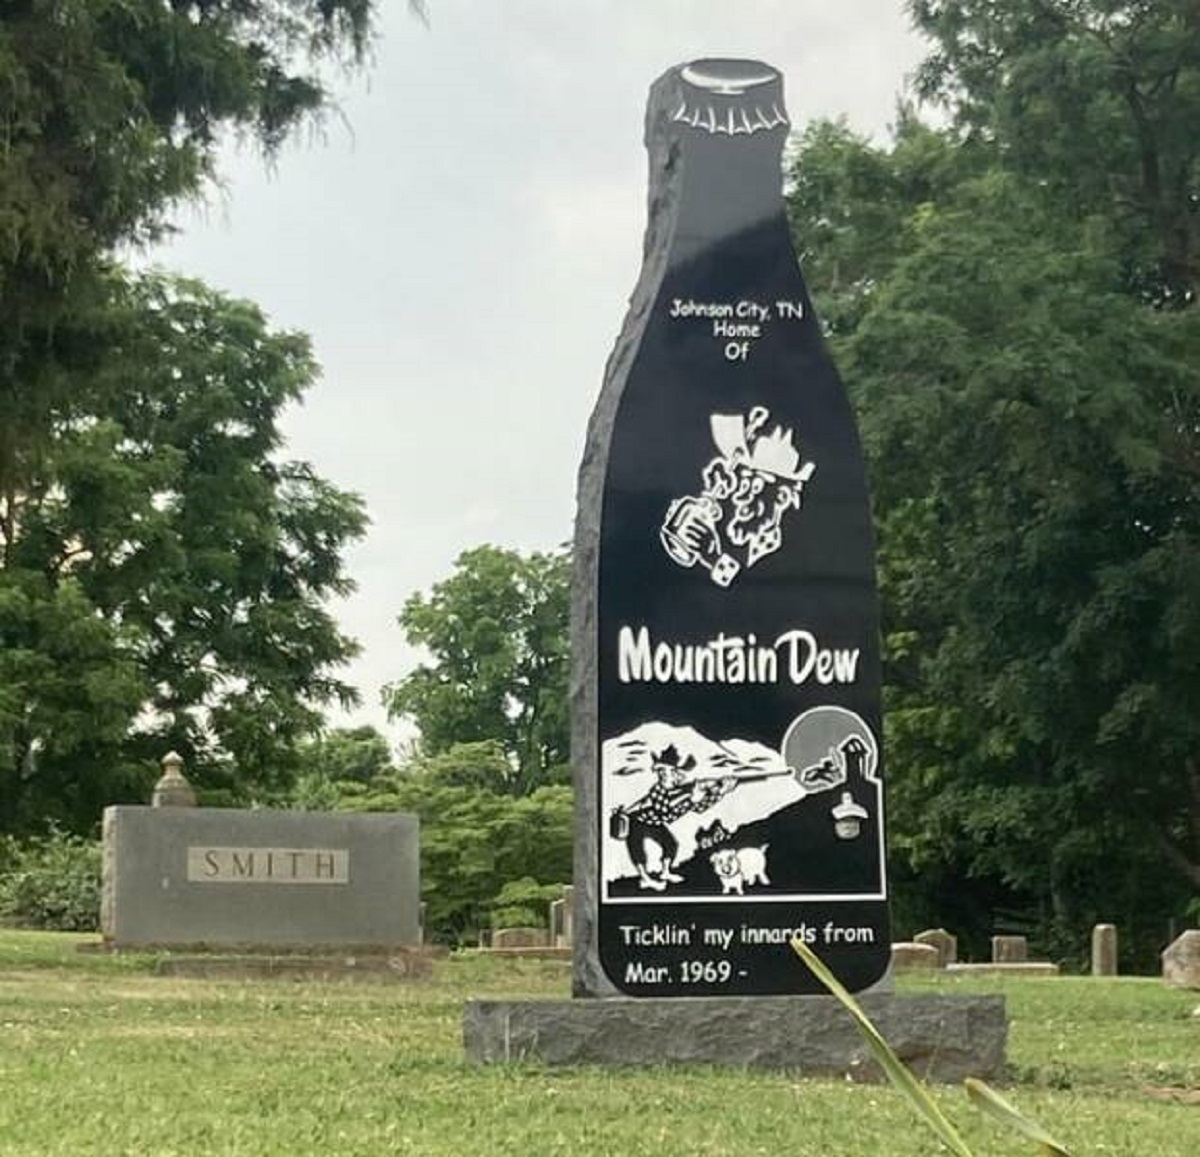 "My hometown erected a Mountain Dew tombstone in our local cemetery:"